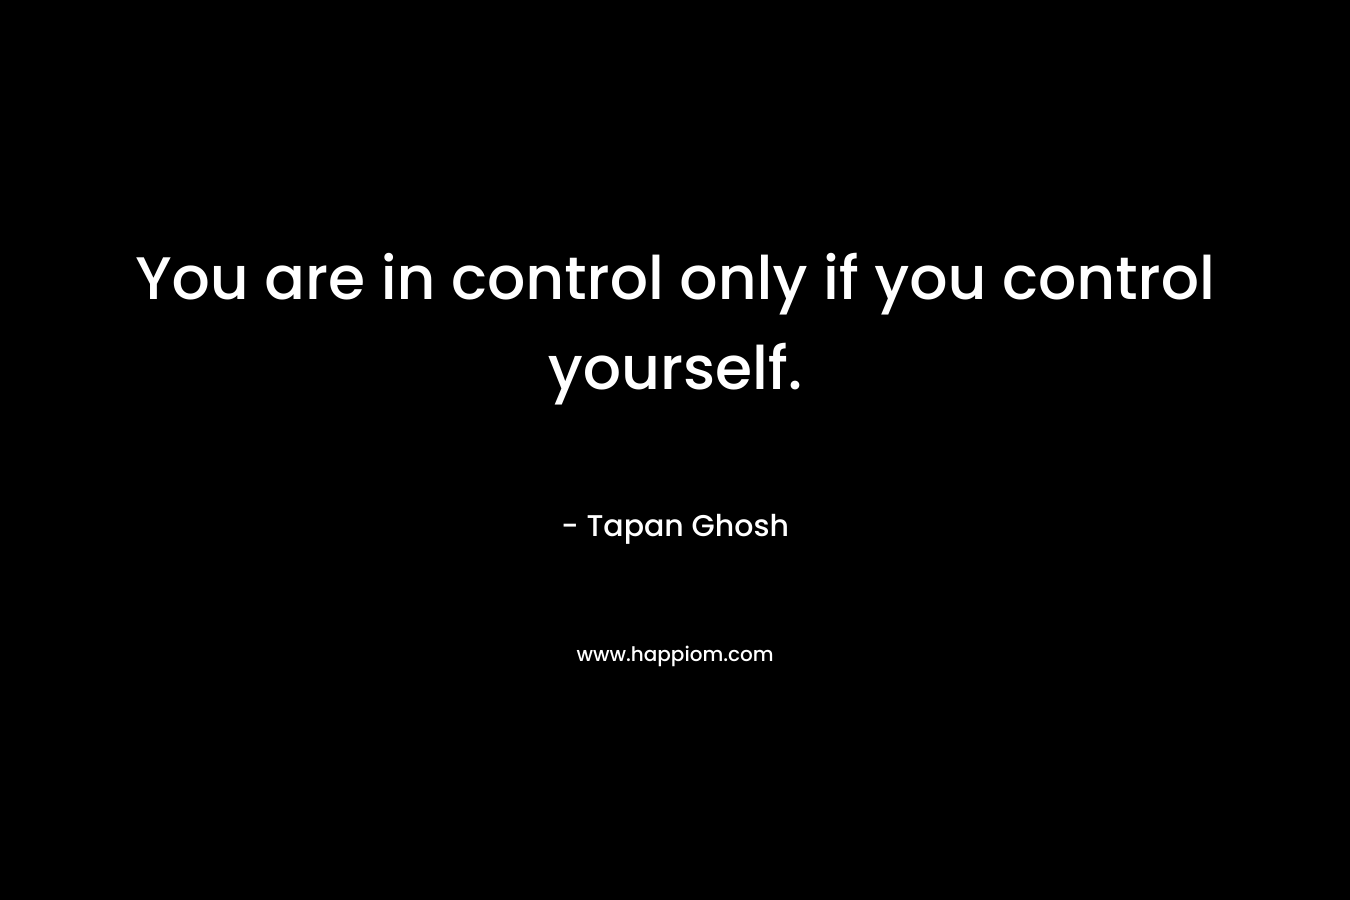 You are in control only if you control yourself. – Tapan Ghosh